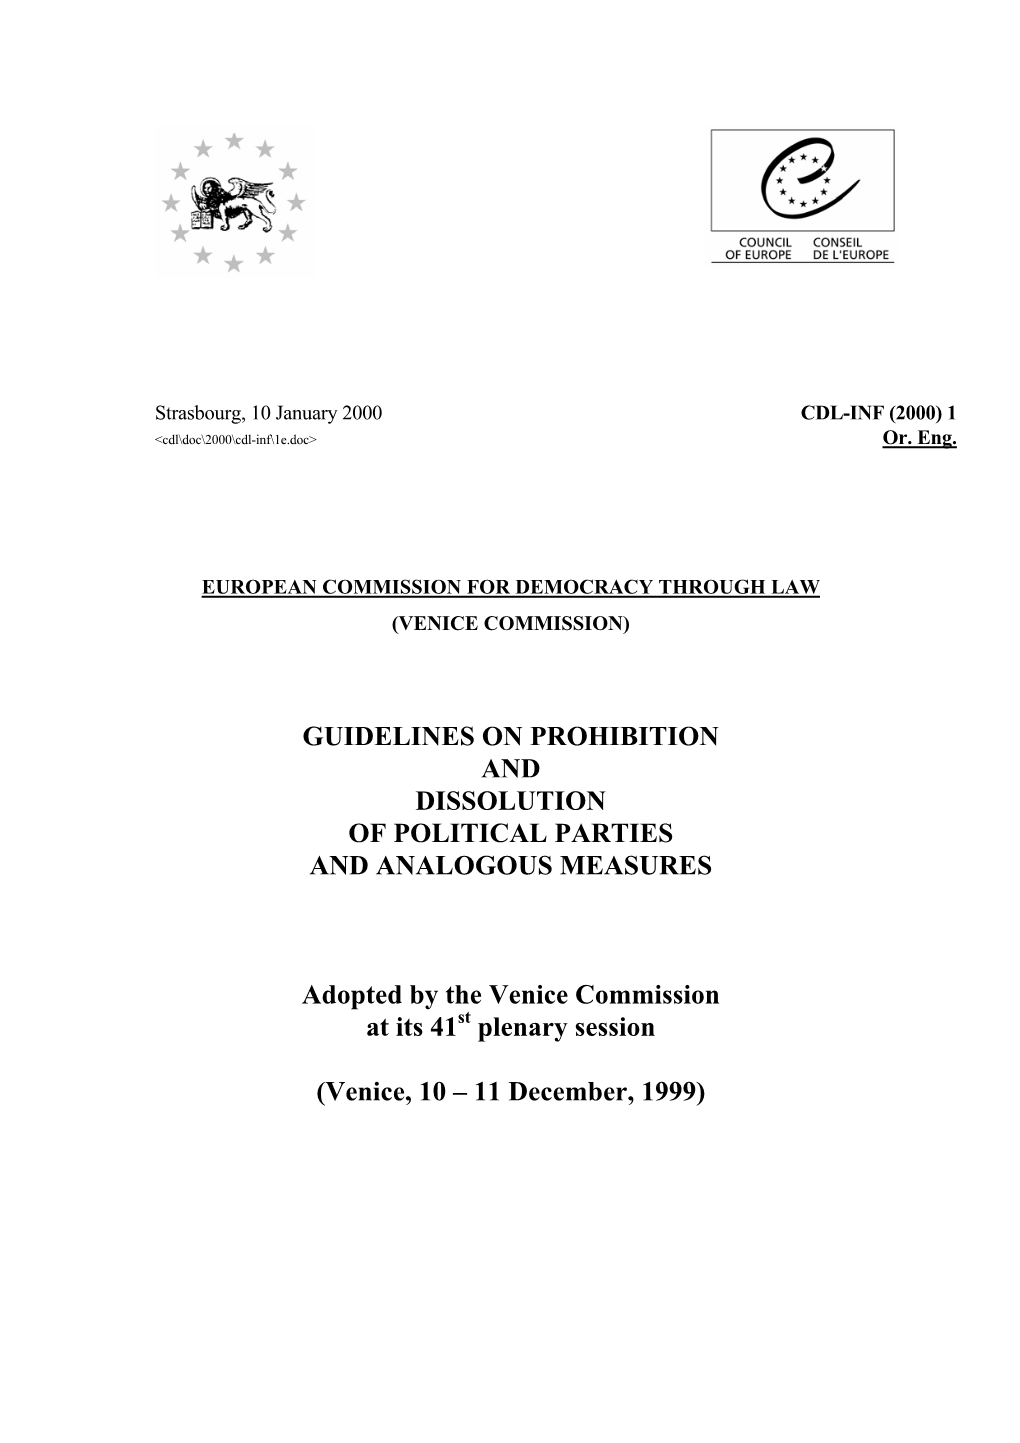 Guidelines on Prohibition and Dissolution of Political Parties and Analogous Measures